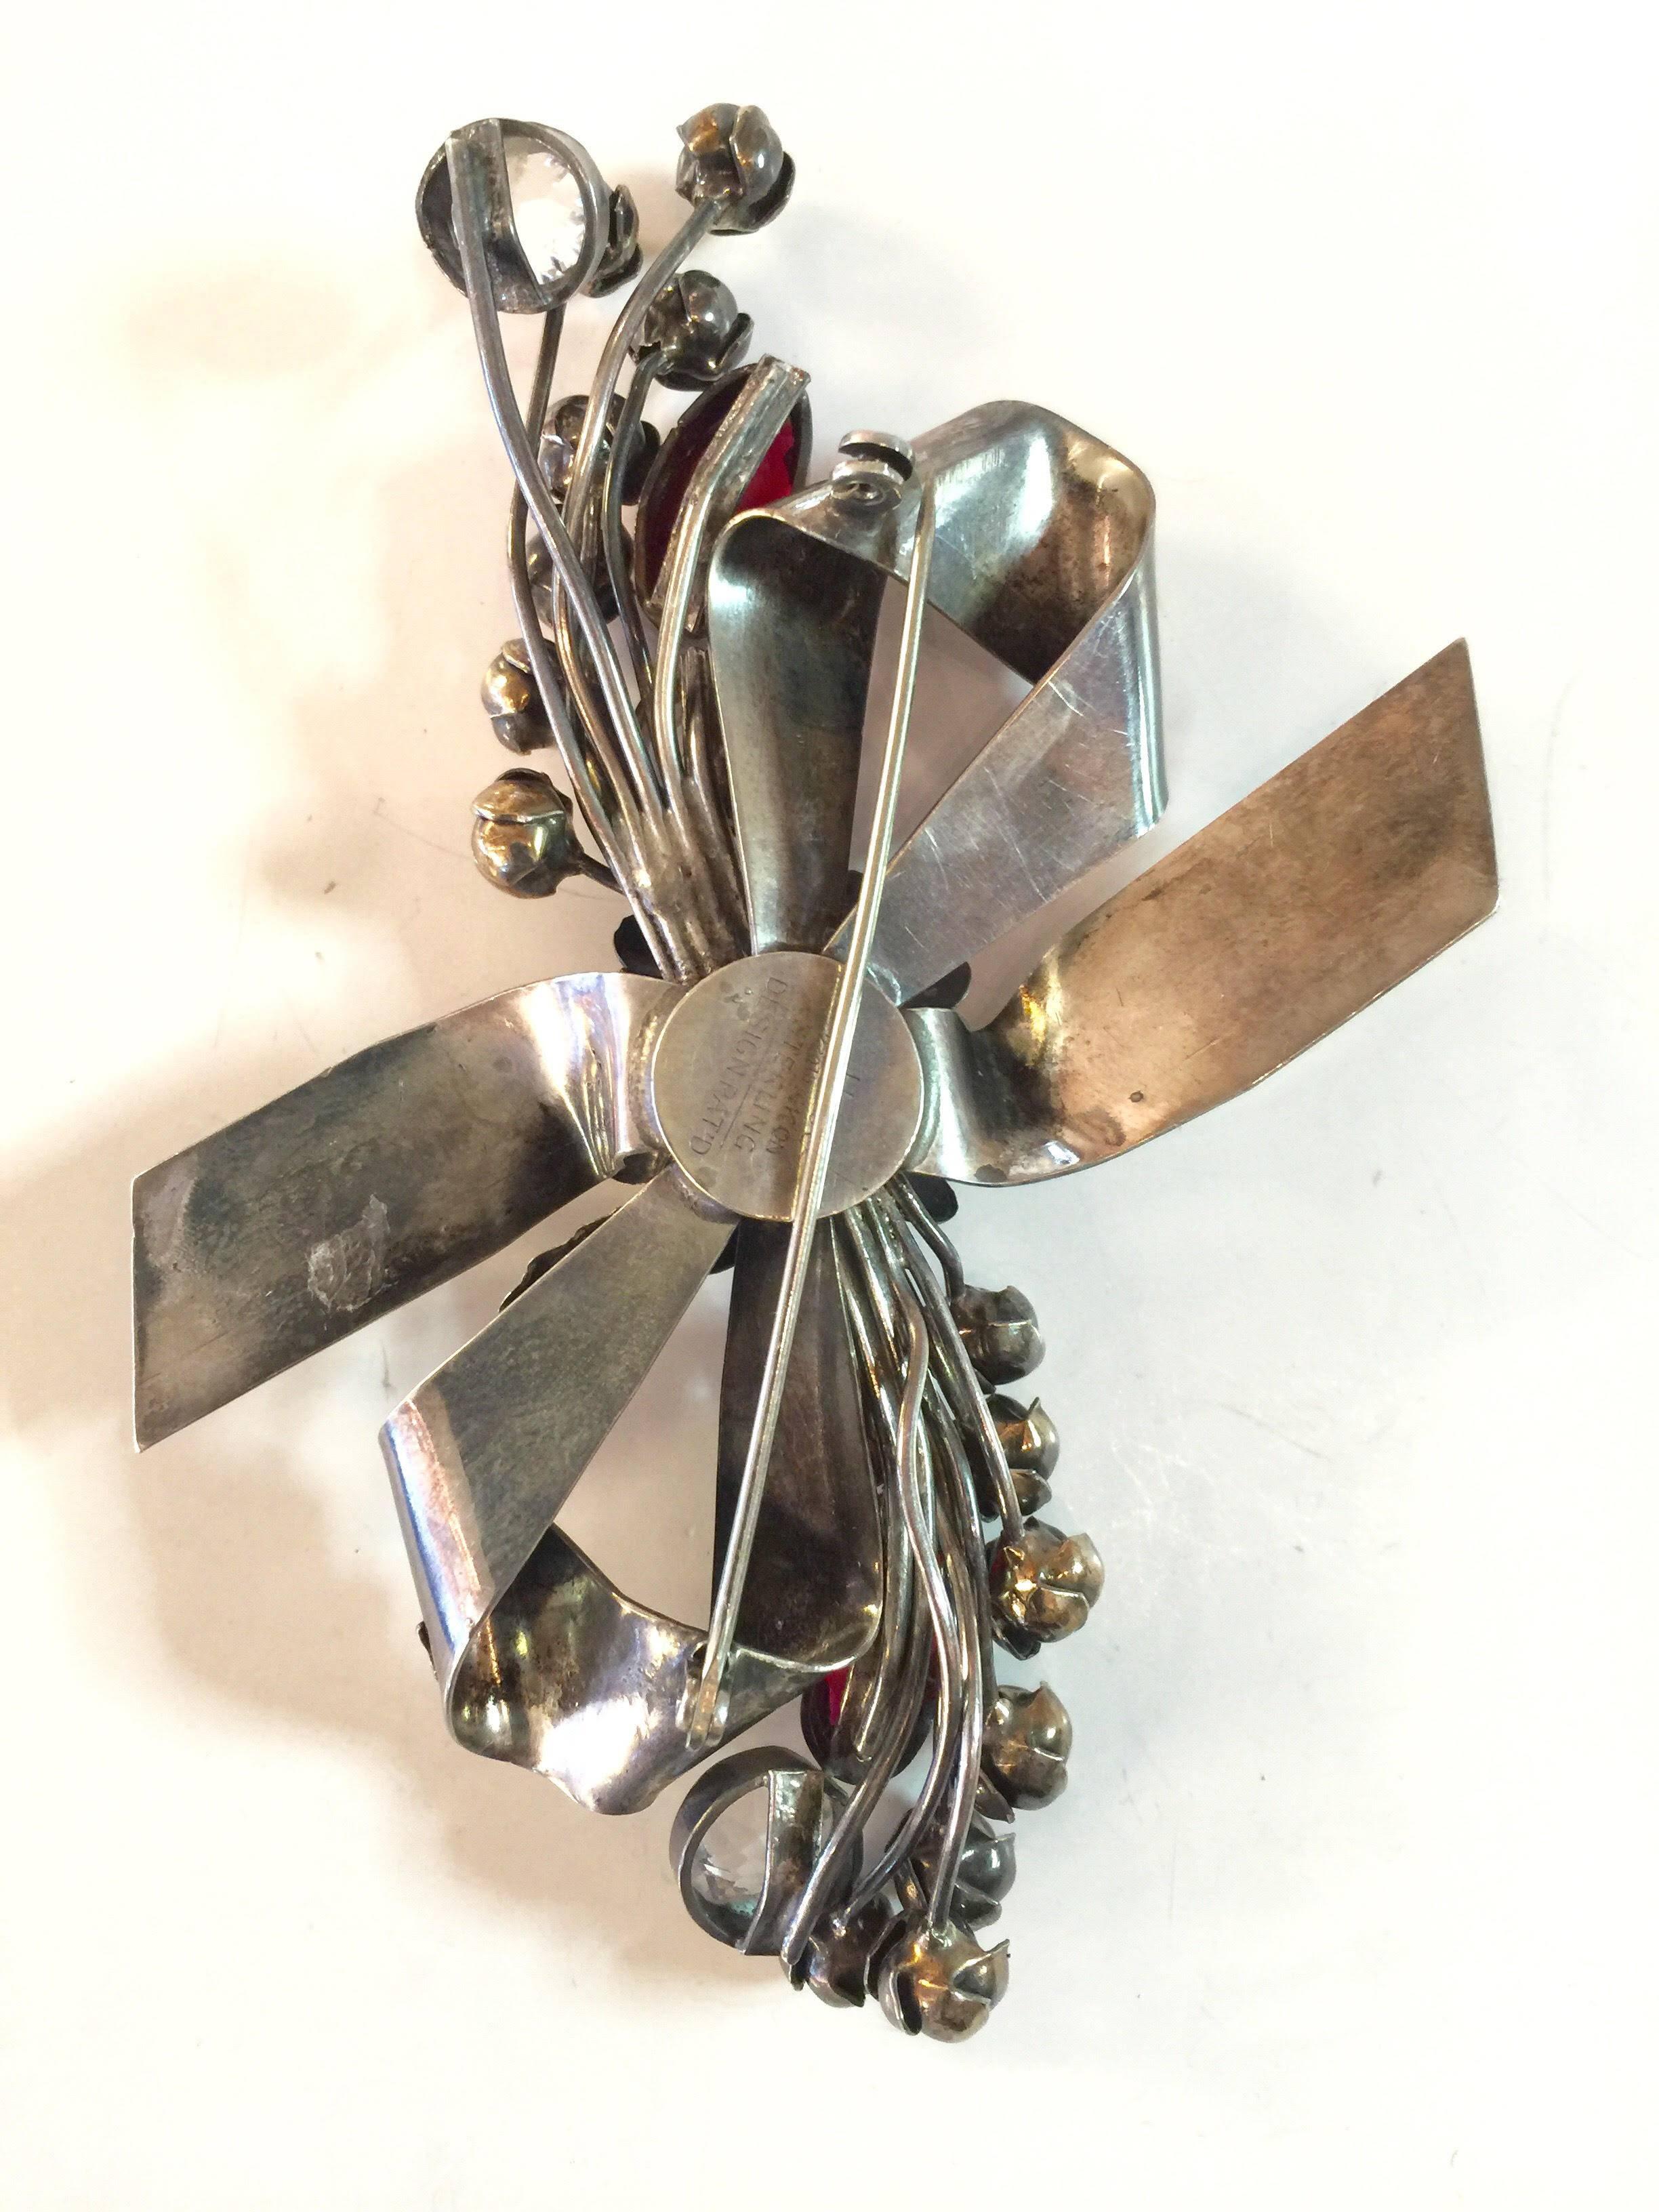 An exquisite classic Hobe sterling floral spray brooch with a bow theme, this large brooch measures approximately 4